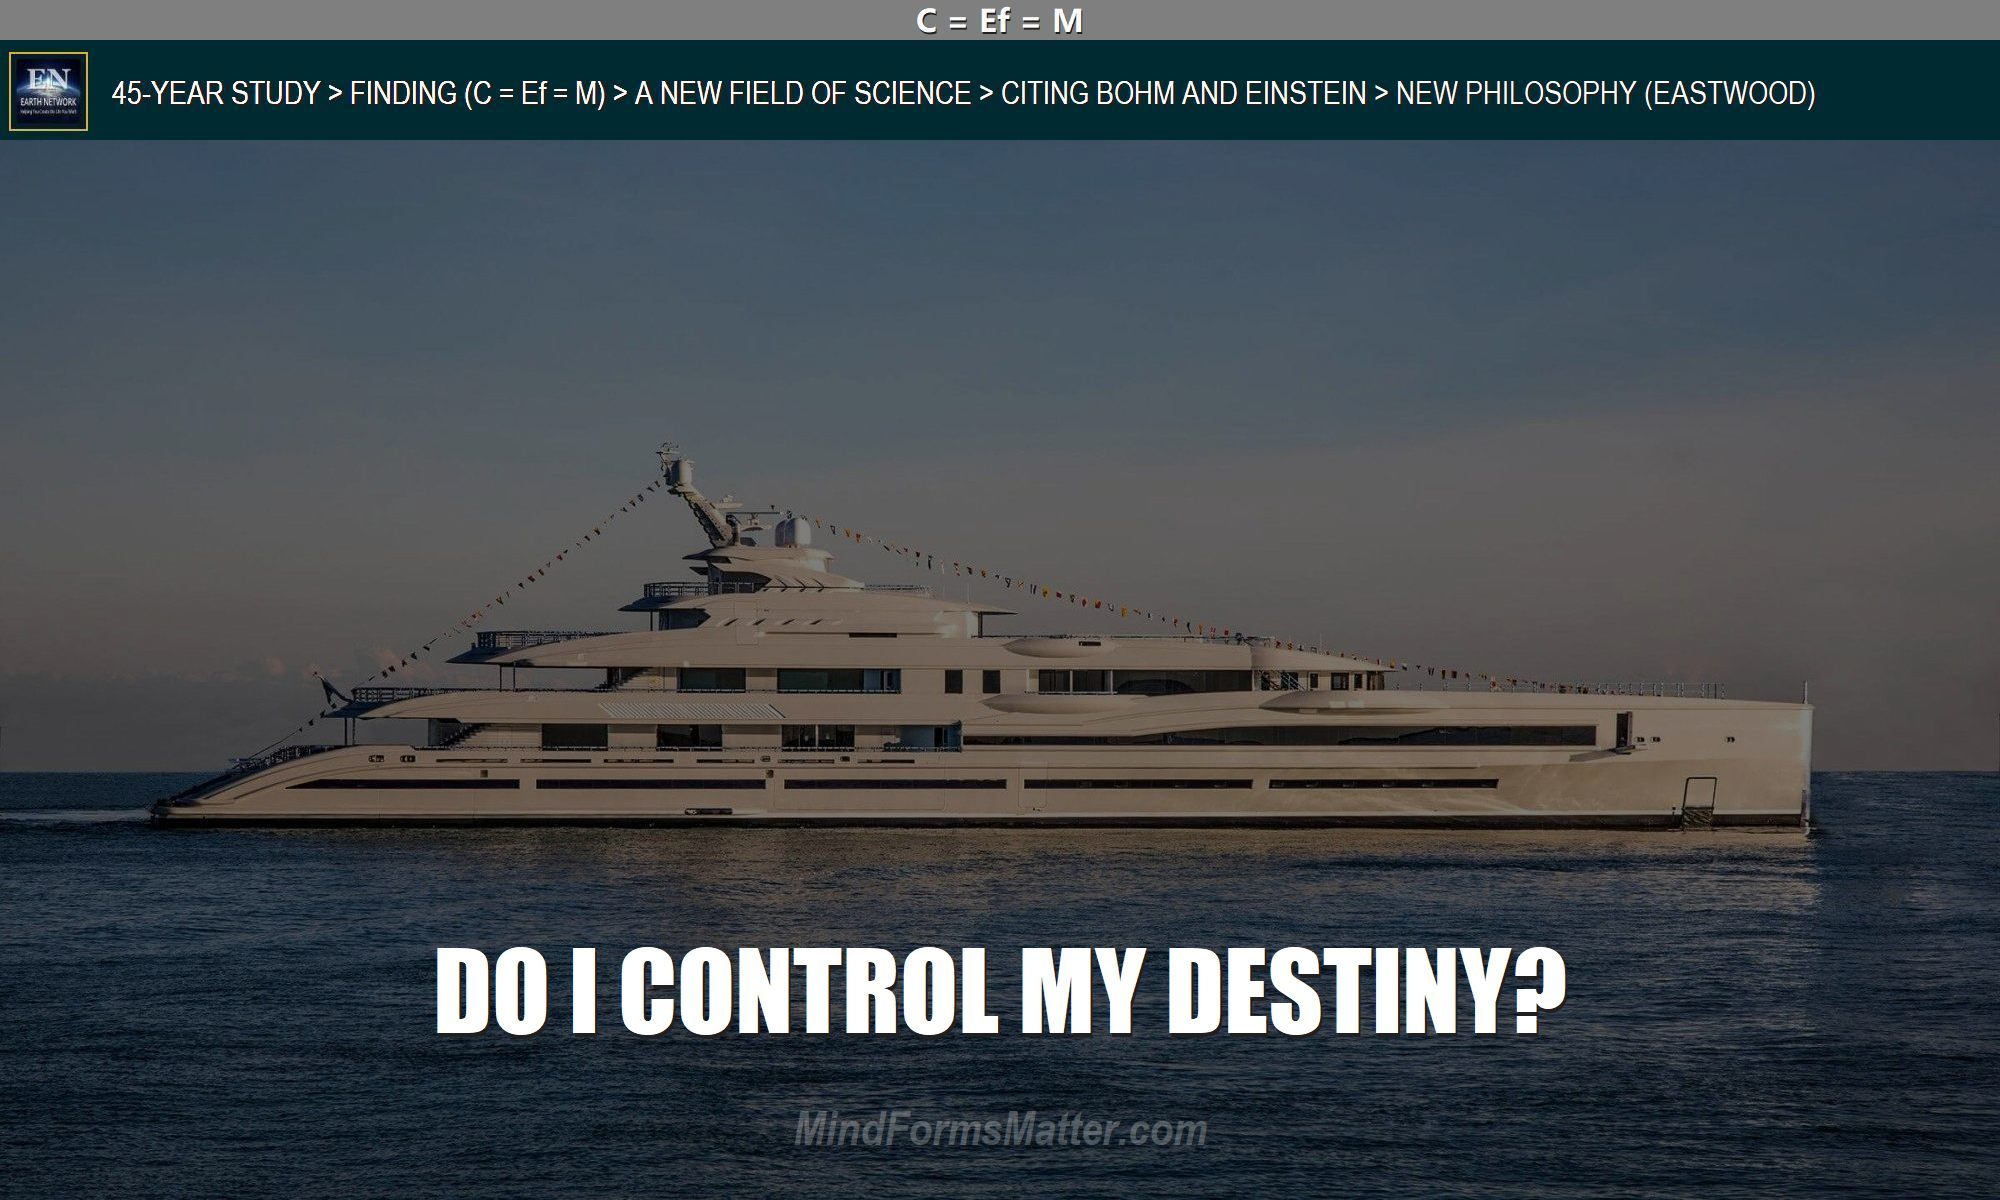 Mega yacht depicts the question do-i-control-my-destiny-can-i-trust-my-life-existence-self